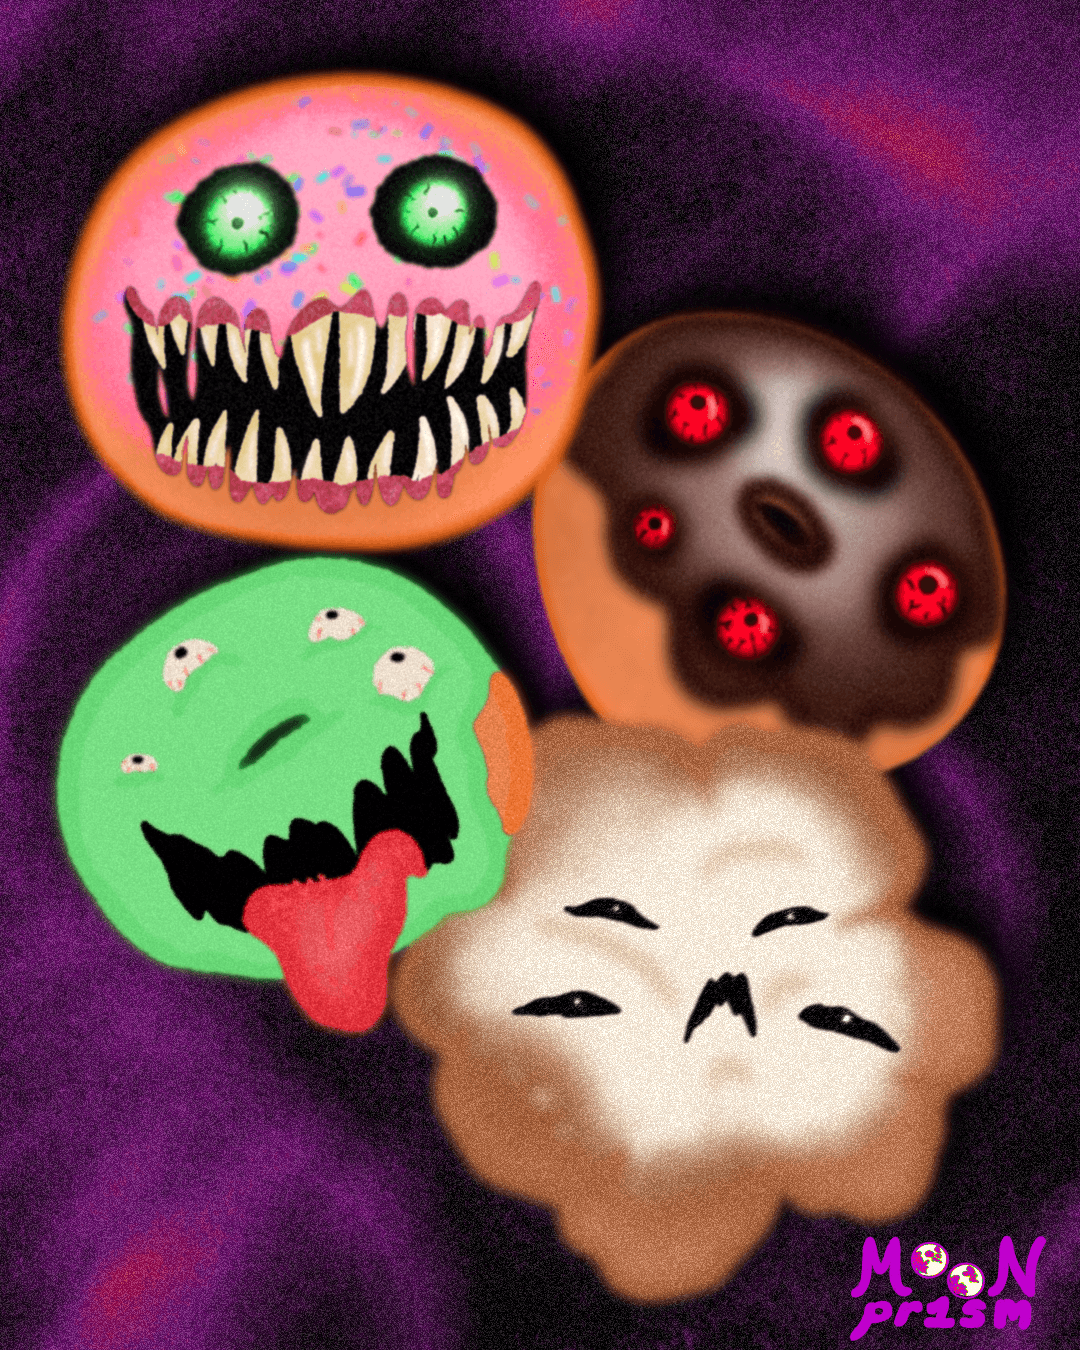 An illustration of monster donuts, some have glowiing eyes, multiples eyes, fangs, and look generally unappetizing.